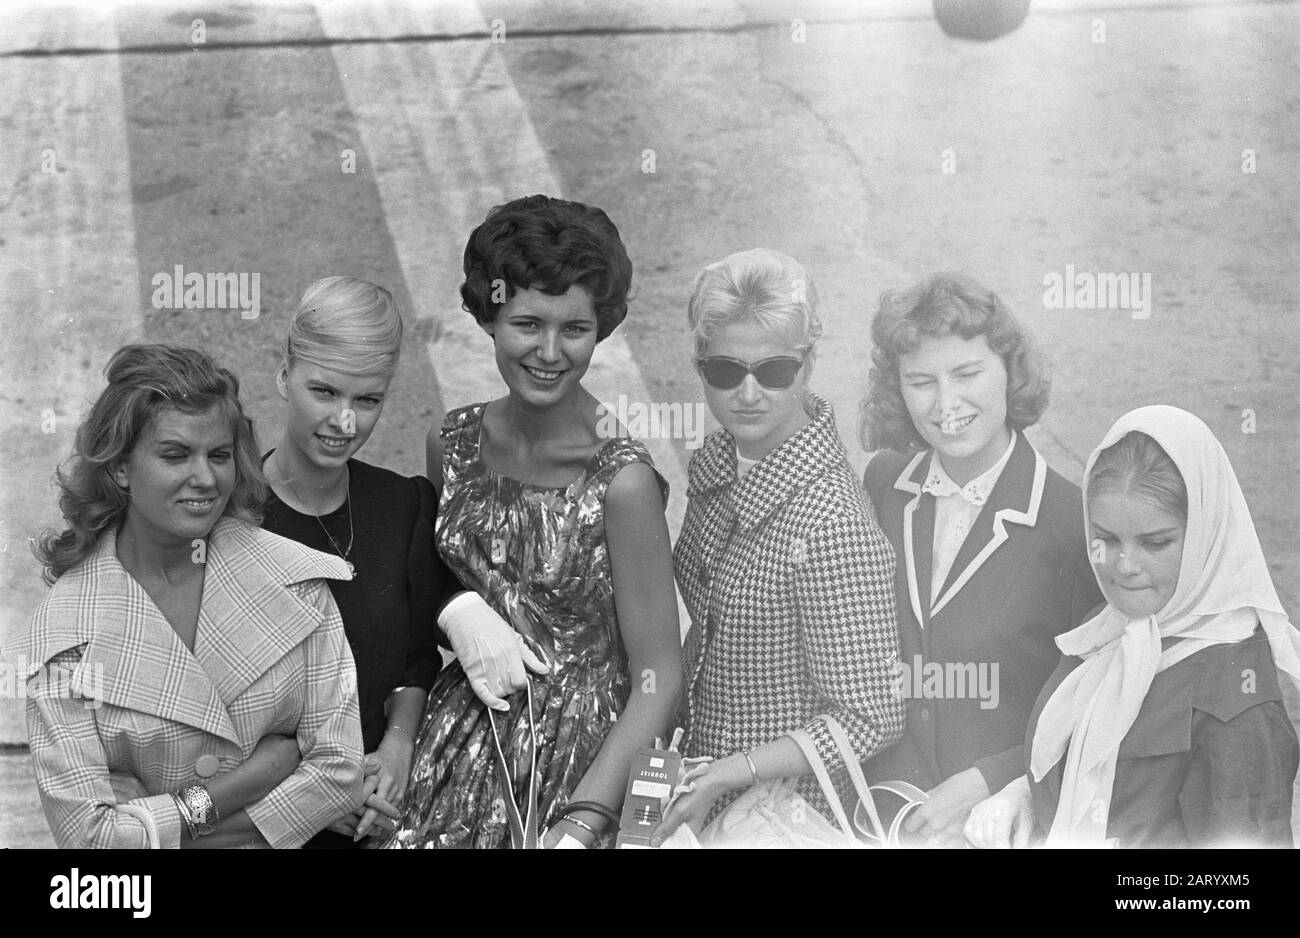 Departure to Palermo of the beauty queen from l.n.r. miss Belgium (Michele Goethals?) , Miss Denmark, Miss Holland (Peggy Erwich), Miss Luxembourg, Miss Iceland, Miss... [TEXT NOT COMPLETE] Date: July 29, 1959 Keywords: misselections, women Personal name: Erwich, Peggy Stock Photo